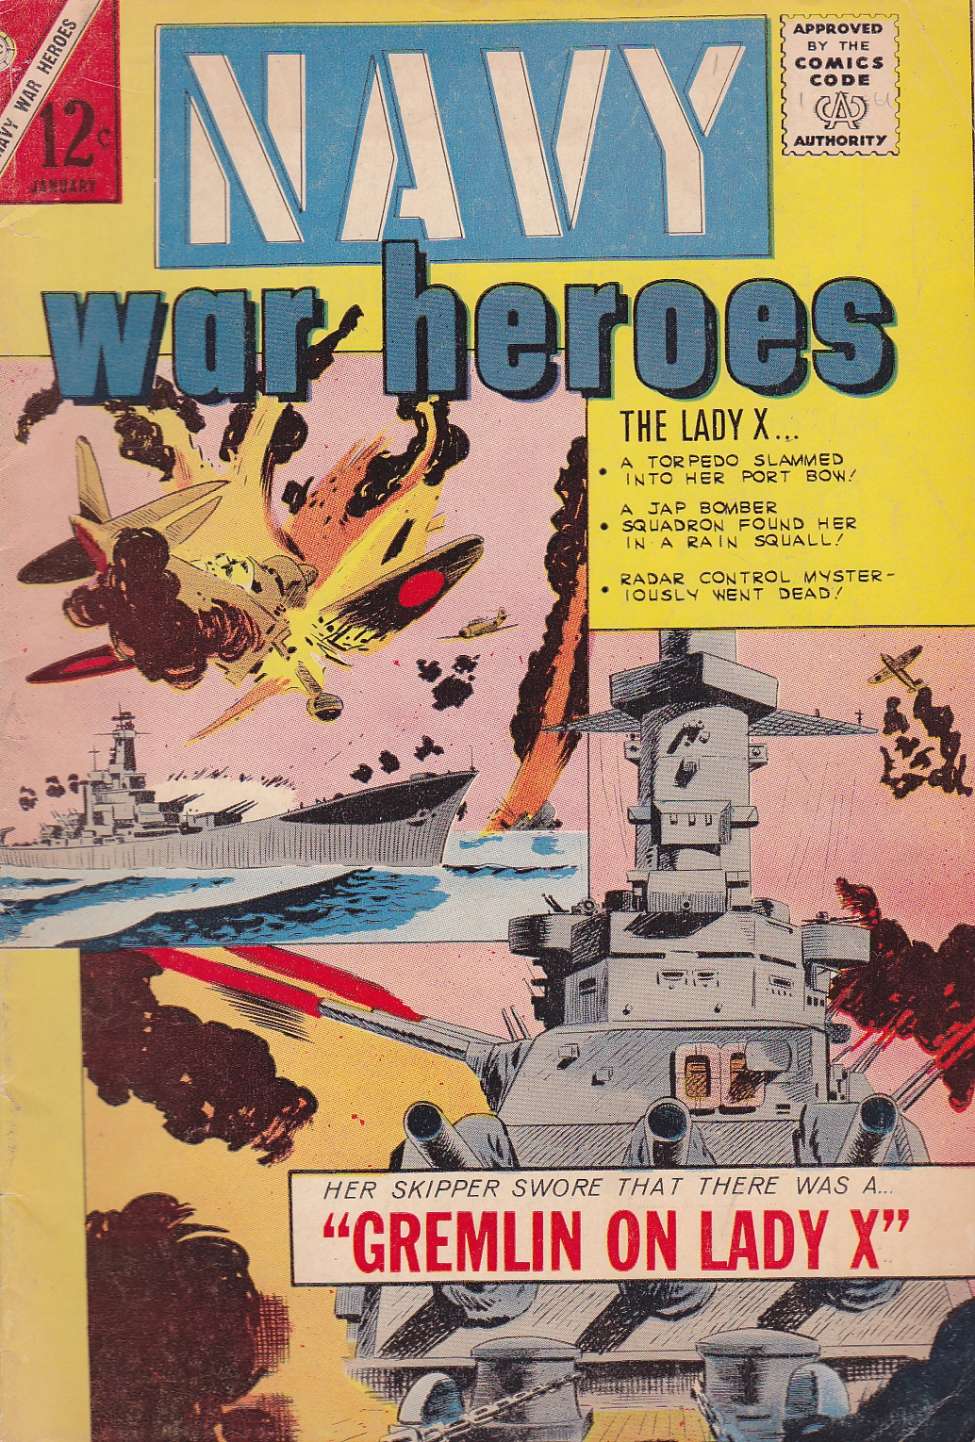 Comic Book Cover For Navy War Heroes 1 - Version 1